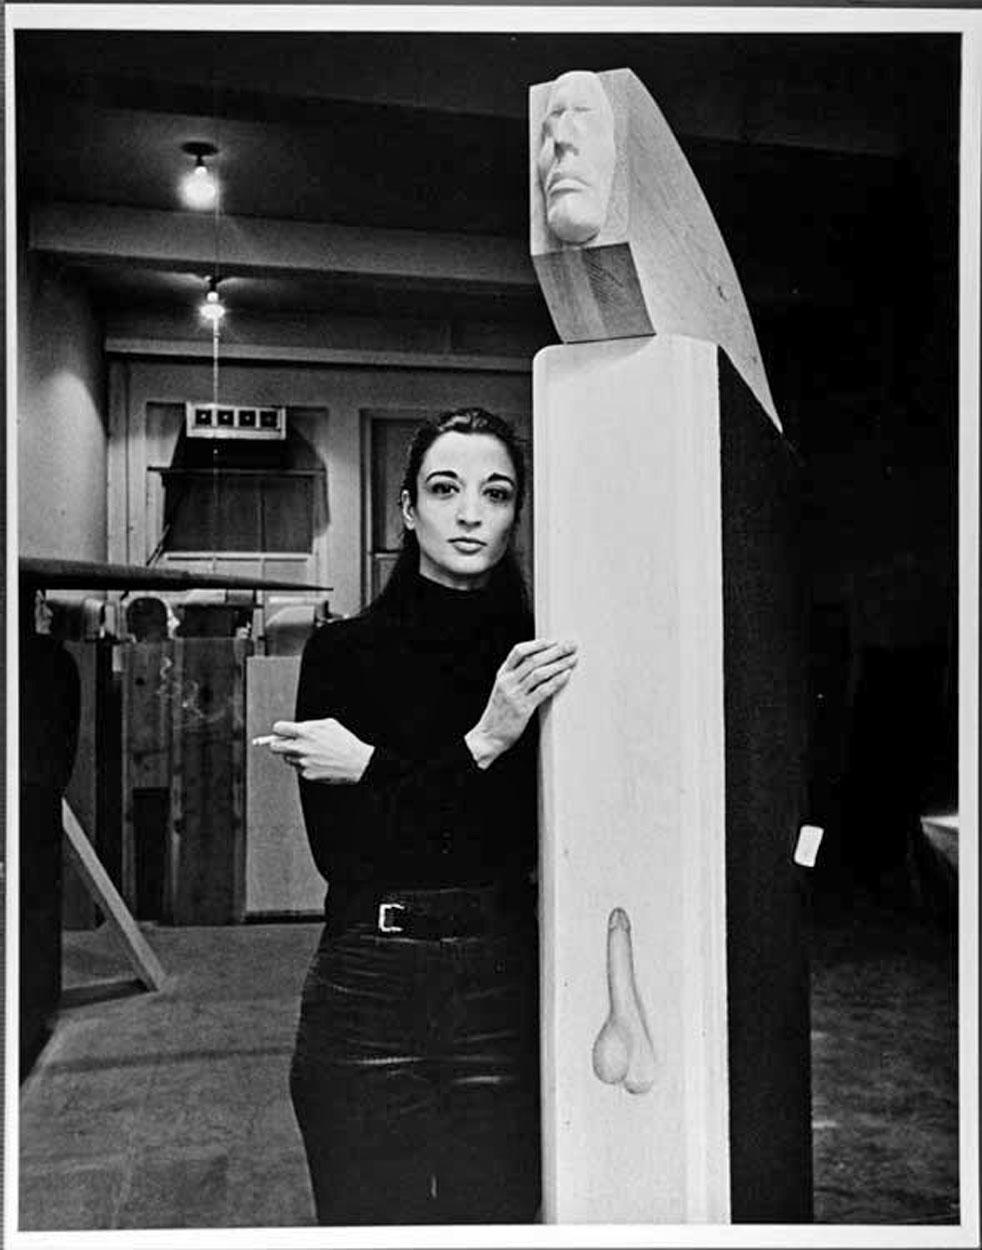 Jack Mitchell Black and White Photograph - Sculptor Marisol (Maria Sol Escobar) in her NYC studio